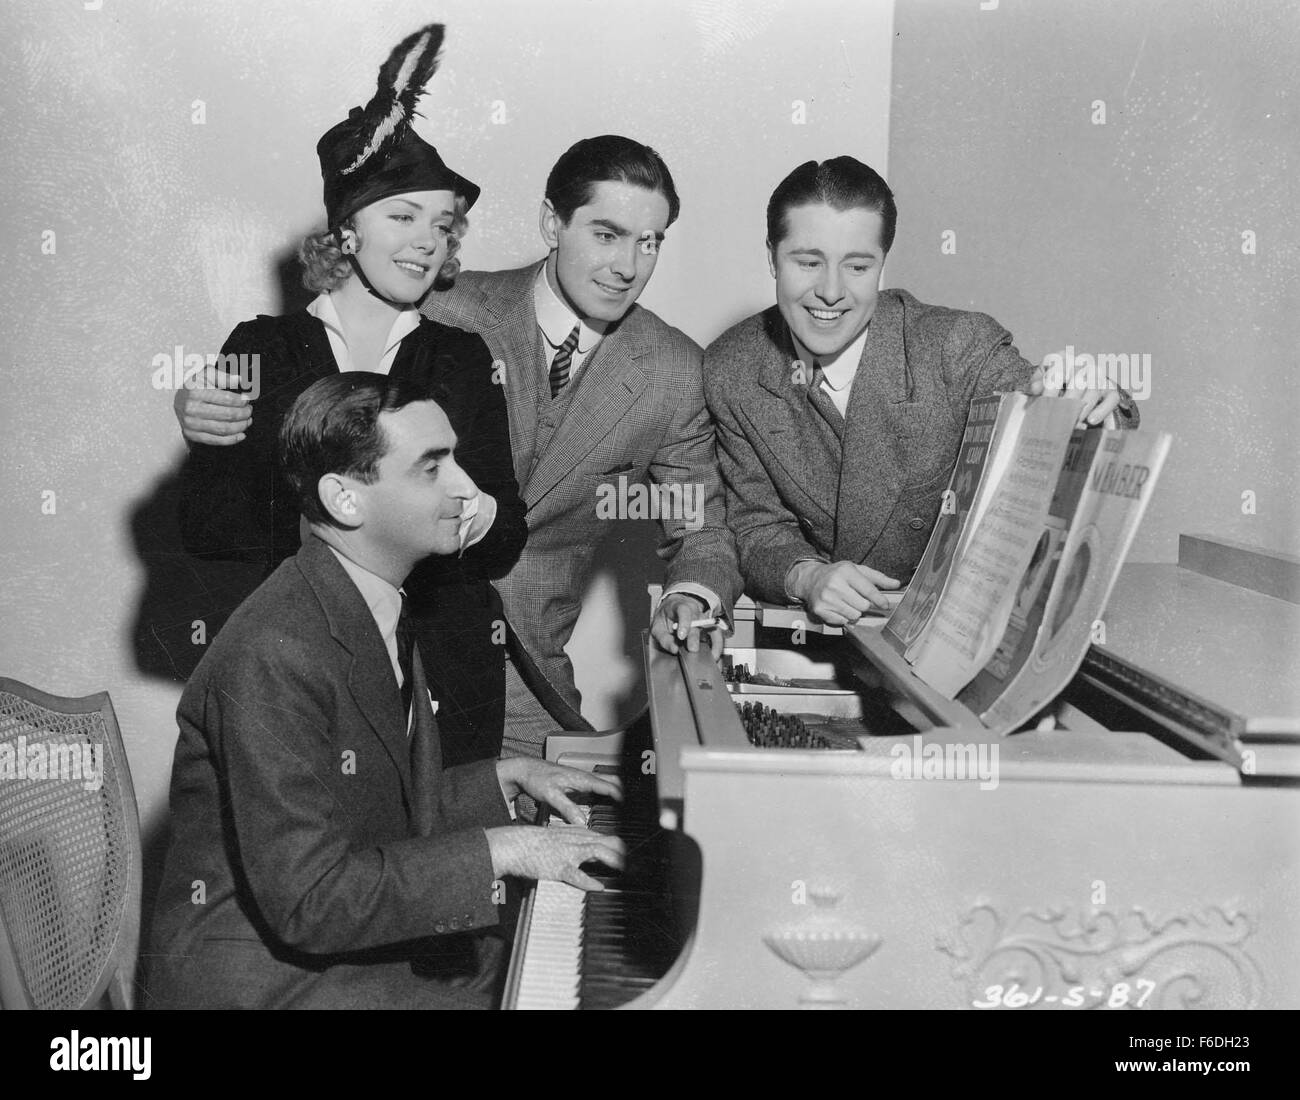 RELEASED: May 24, 1938 - Original Film Title: Alexander's Ragtime Band. PICTURED: ALICE FAYE, TYRONE POWER, DON AMECHE. Stock Photo